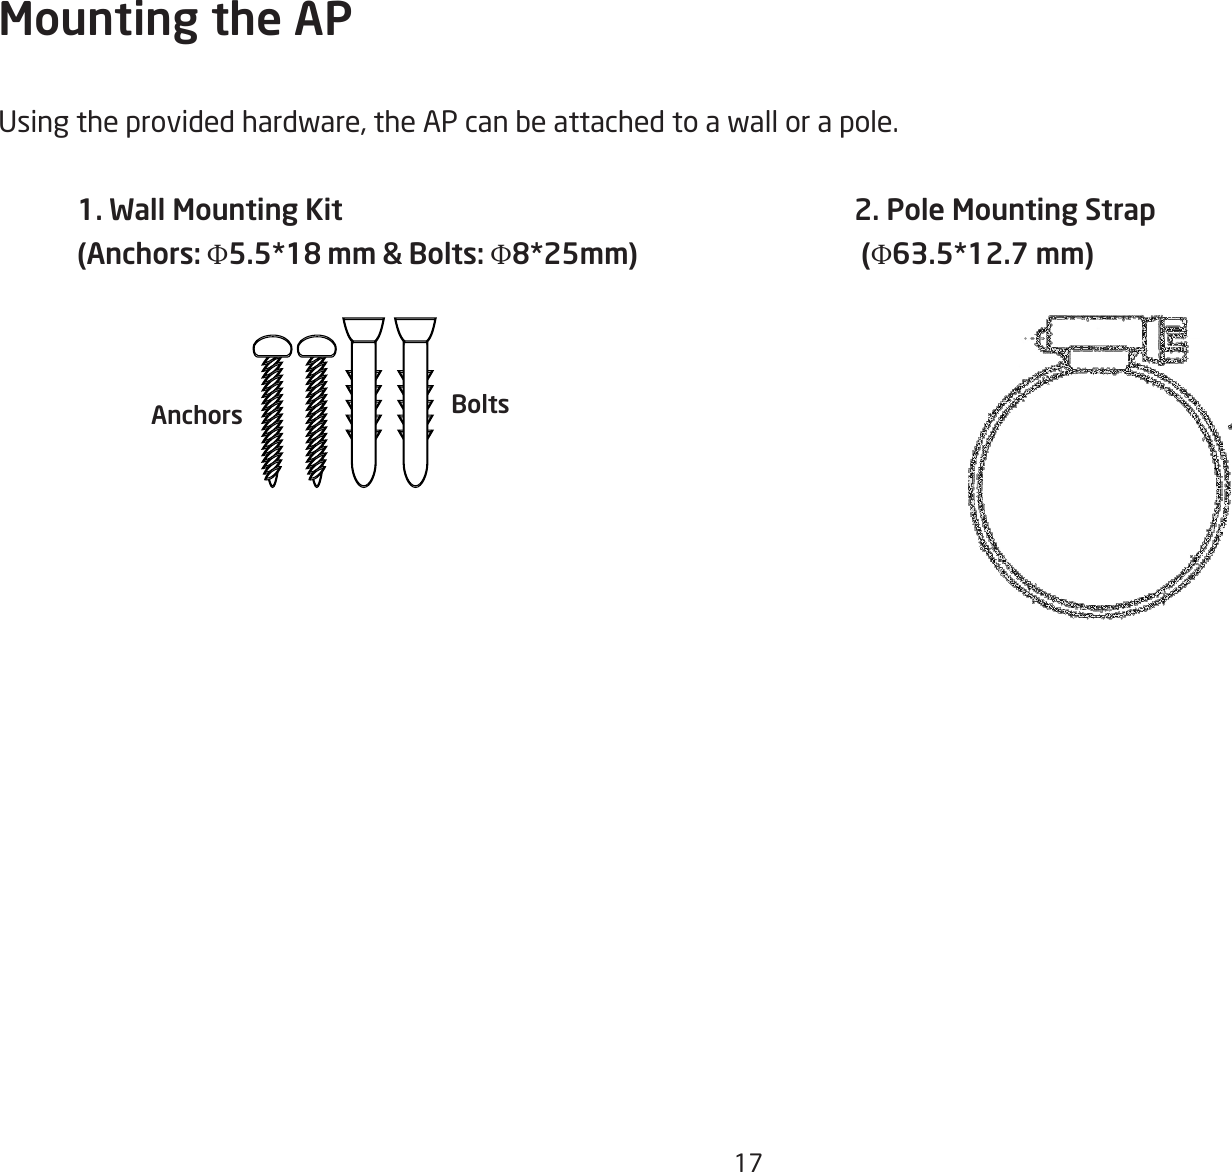 17Mounting the APUsingtheprovidedhardware,theAPcanbeattachedtoawallorapole.1. Wall Mounting Kit (Anchors: Φ5.5*18 mm &amp; Bolts: Φ8*25mm)2. Pole Mounting Strap (Φ63.5*12.7 mm)BoltsAnchors